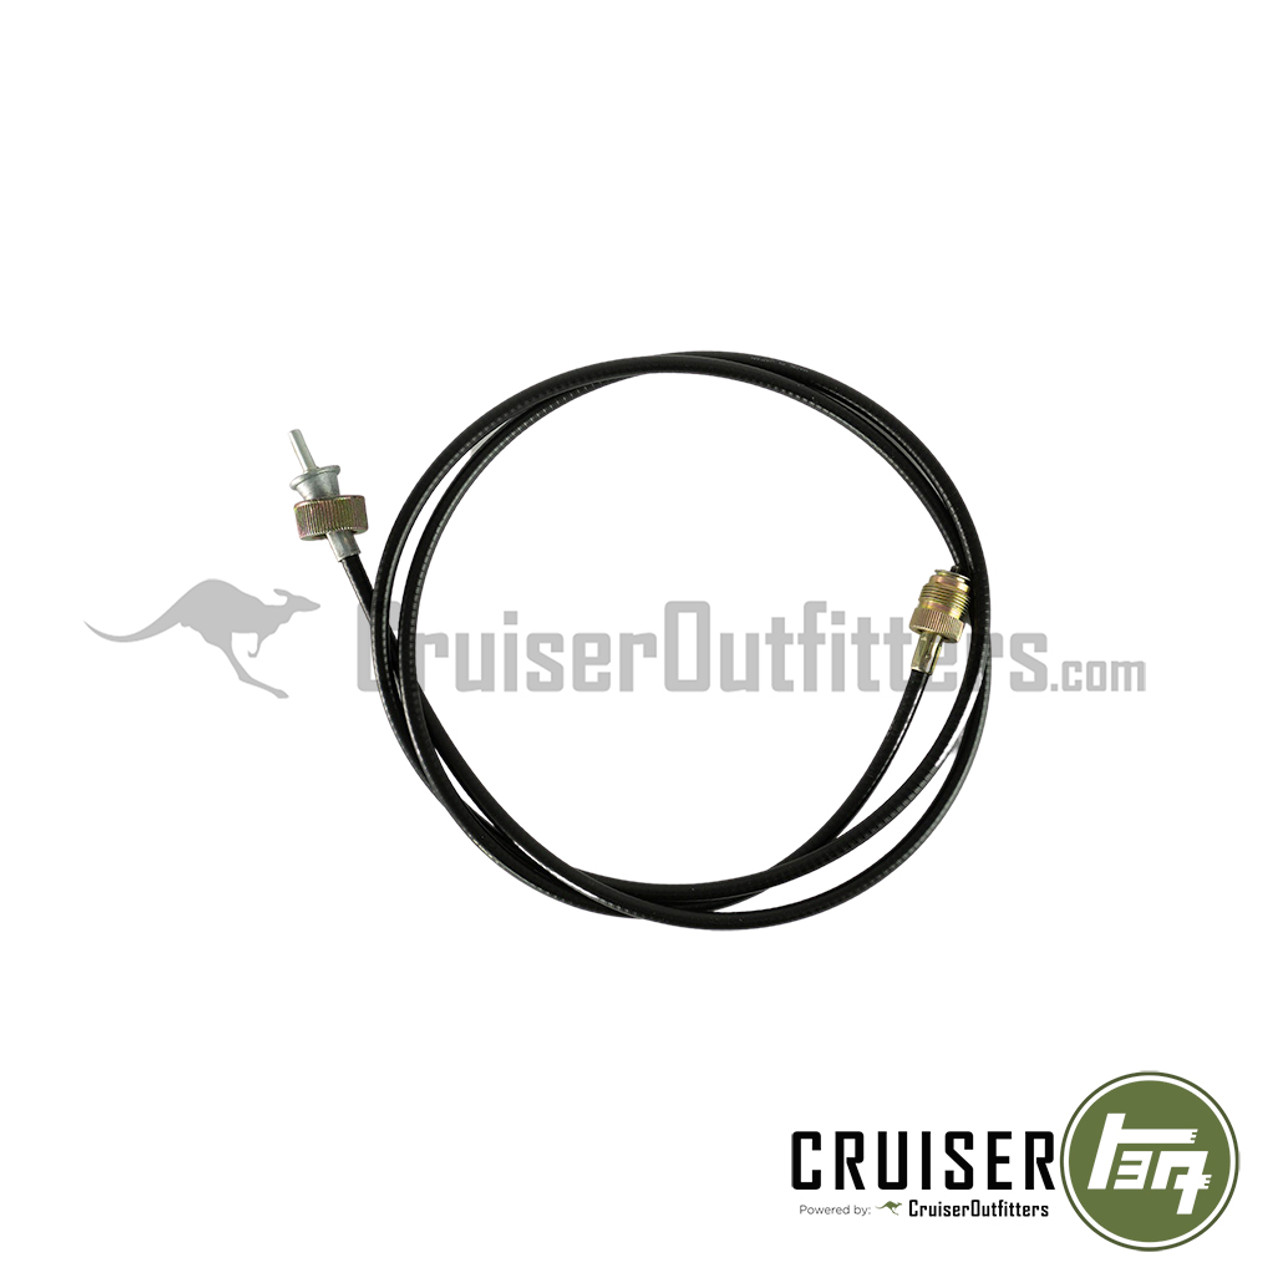 Speedometer Cable - Aftermarket - Fits 1968 - 9/1972 FJ40 (69"/1750mm OAL, Screw-on at Speedometer) (SPCB69045)